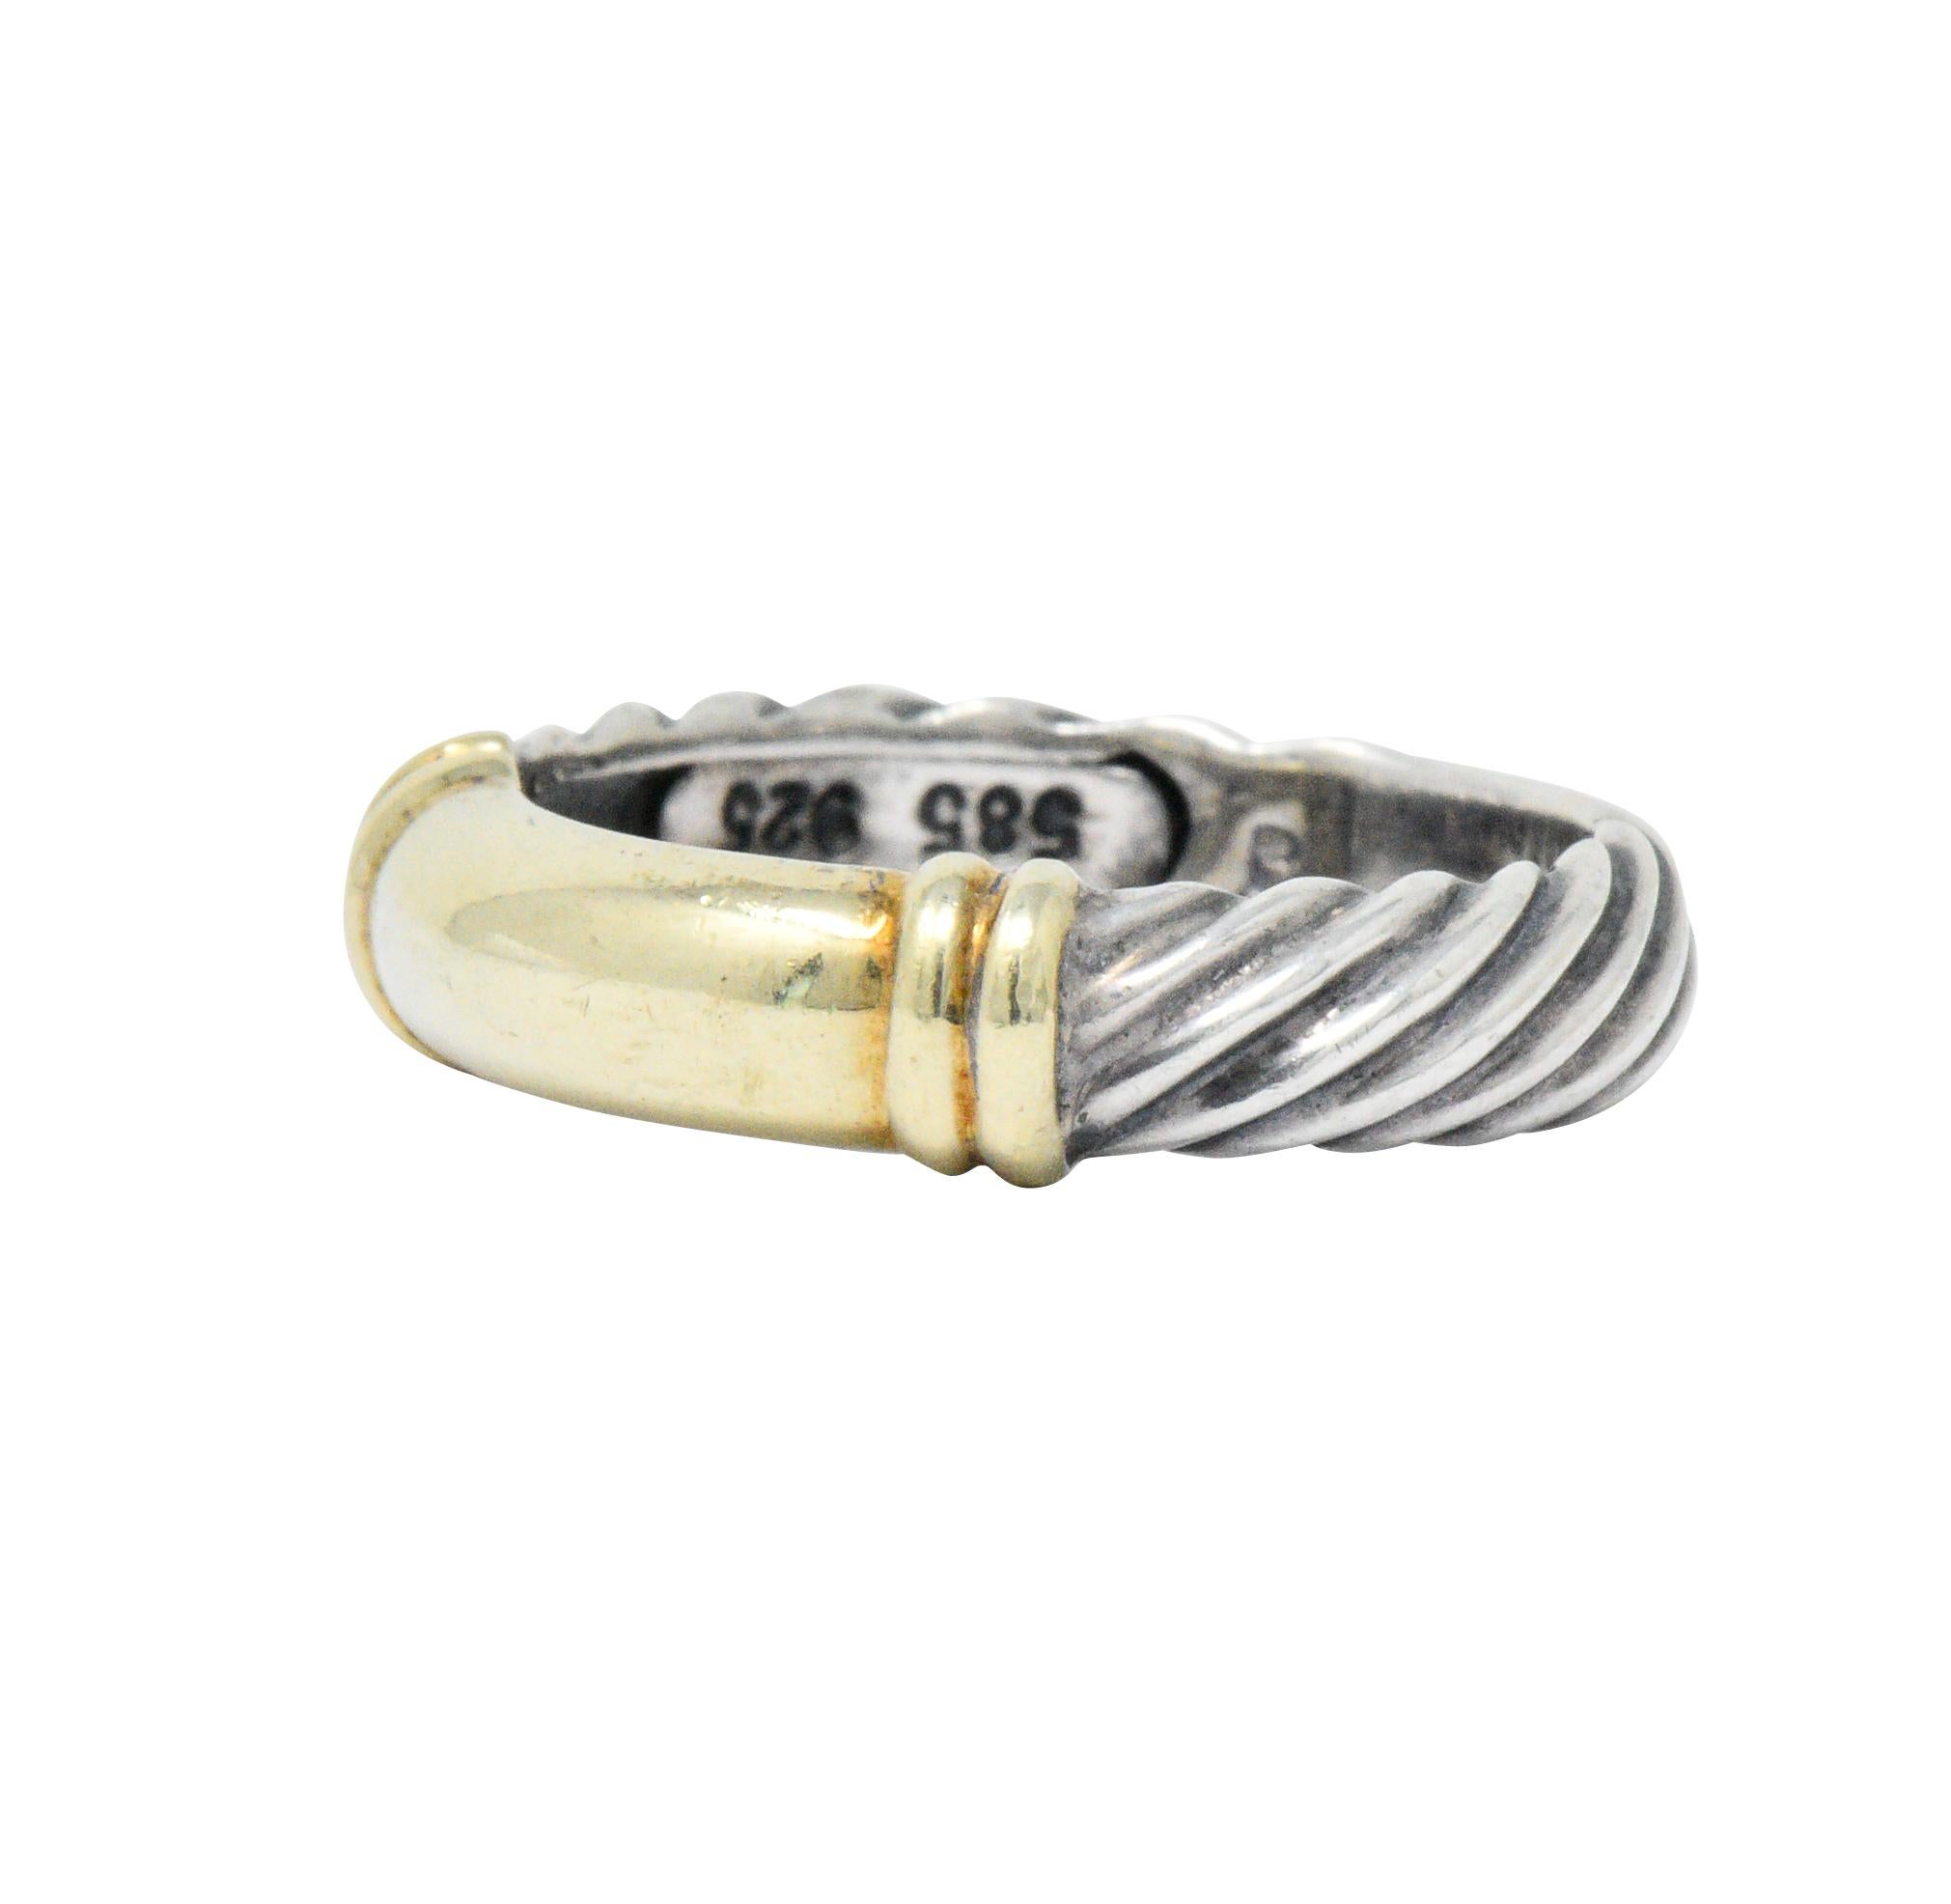 Featuring 14k gold wide center focal point with ribbed accents on each side

Band completed with classic sterling silver cable twist 

Signed 925 585 D. Yurman

3 mm wide band

Total Weight: 3.4 grams

Ring Size: 6.5 and sizable

Stylish.